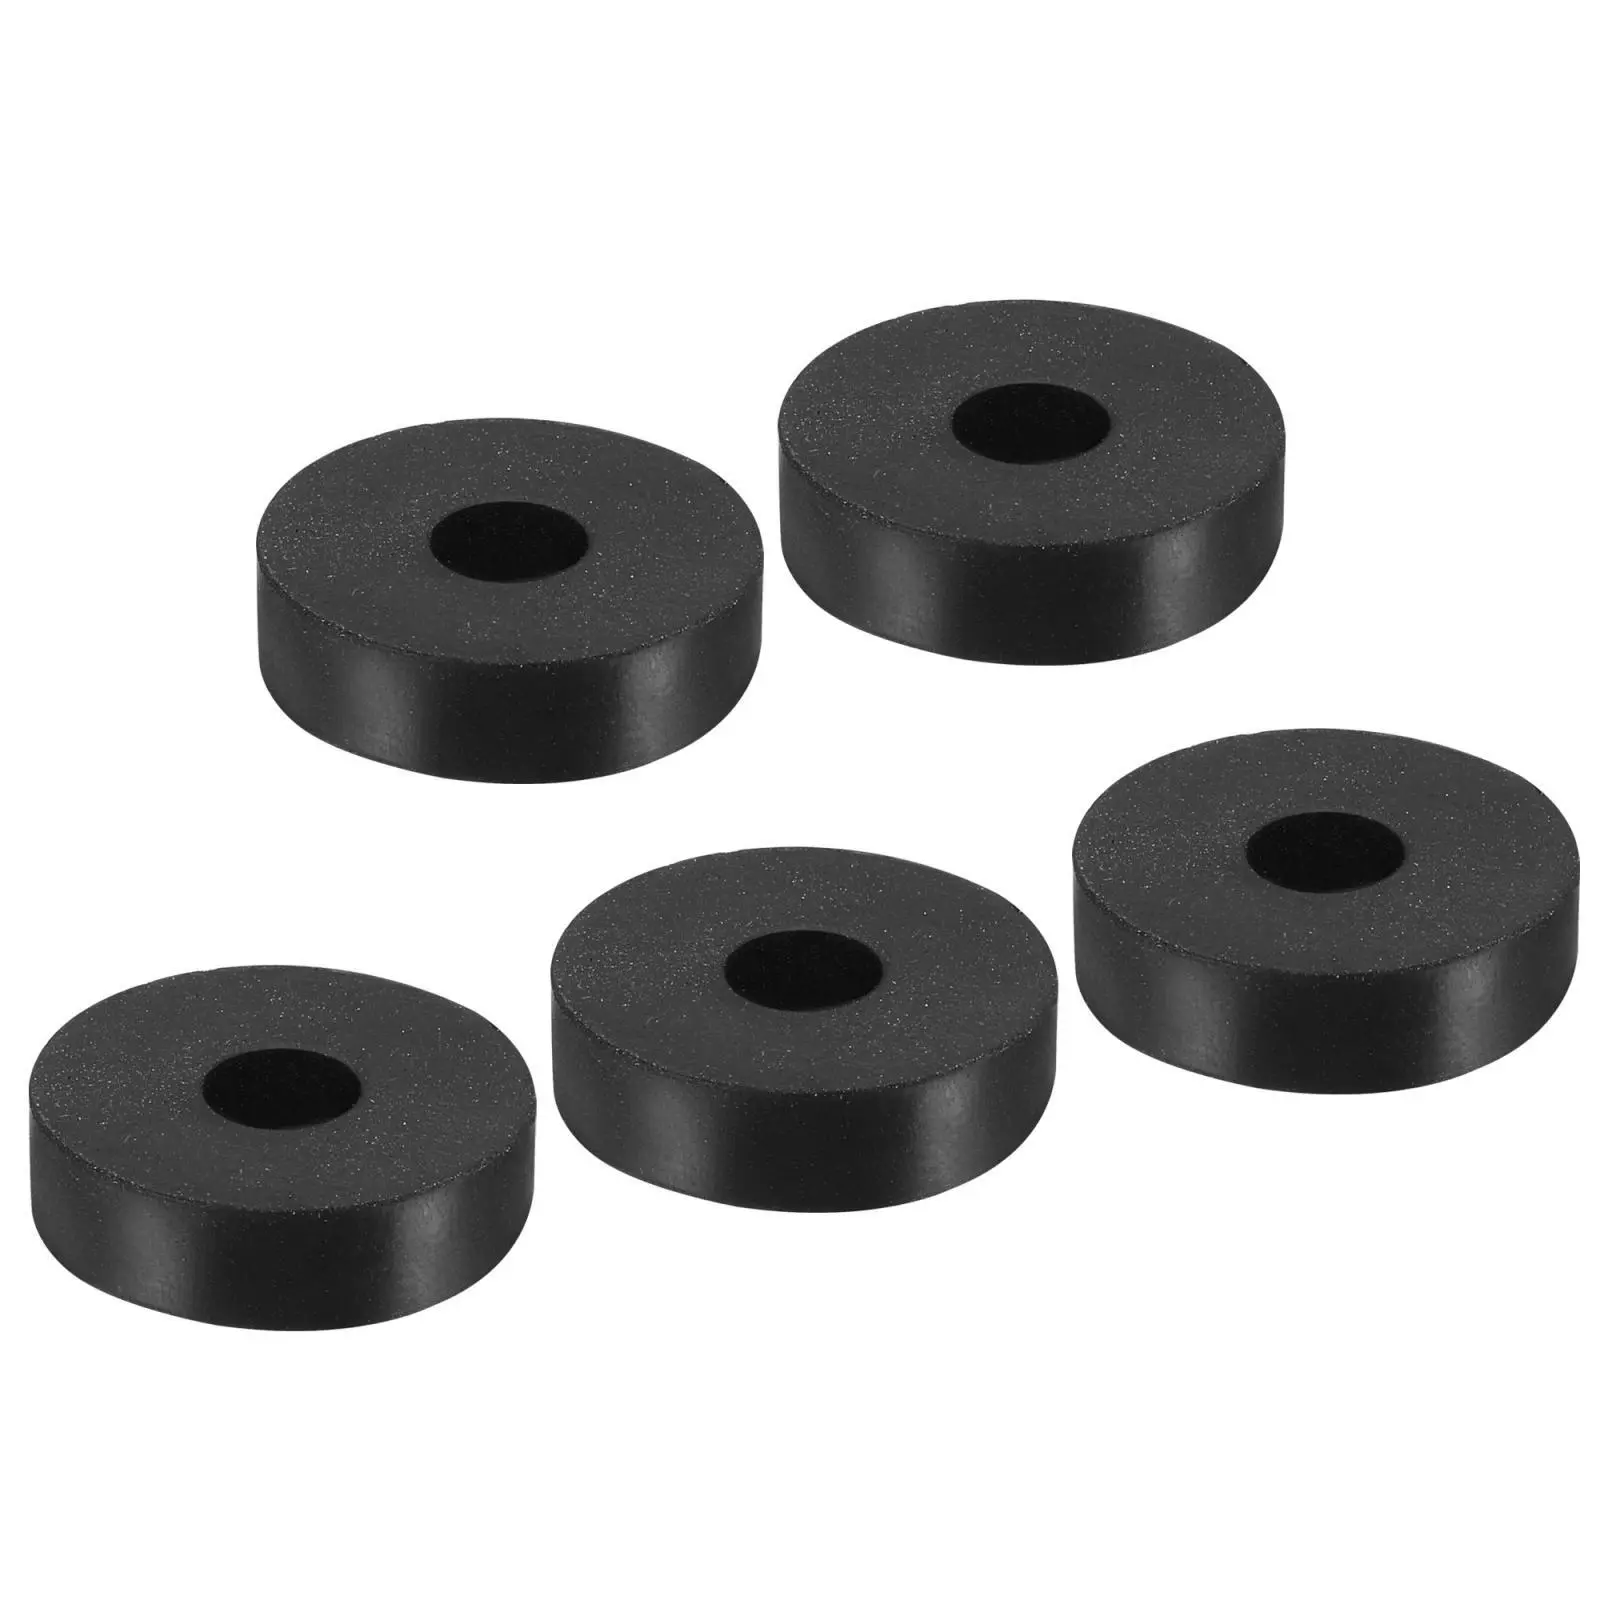 Anti Vibration Washer 26 x 7.8 x 7mm Gasket Spacer for Air Conditioner 5pcs